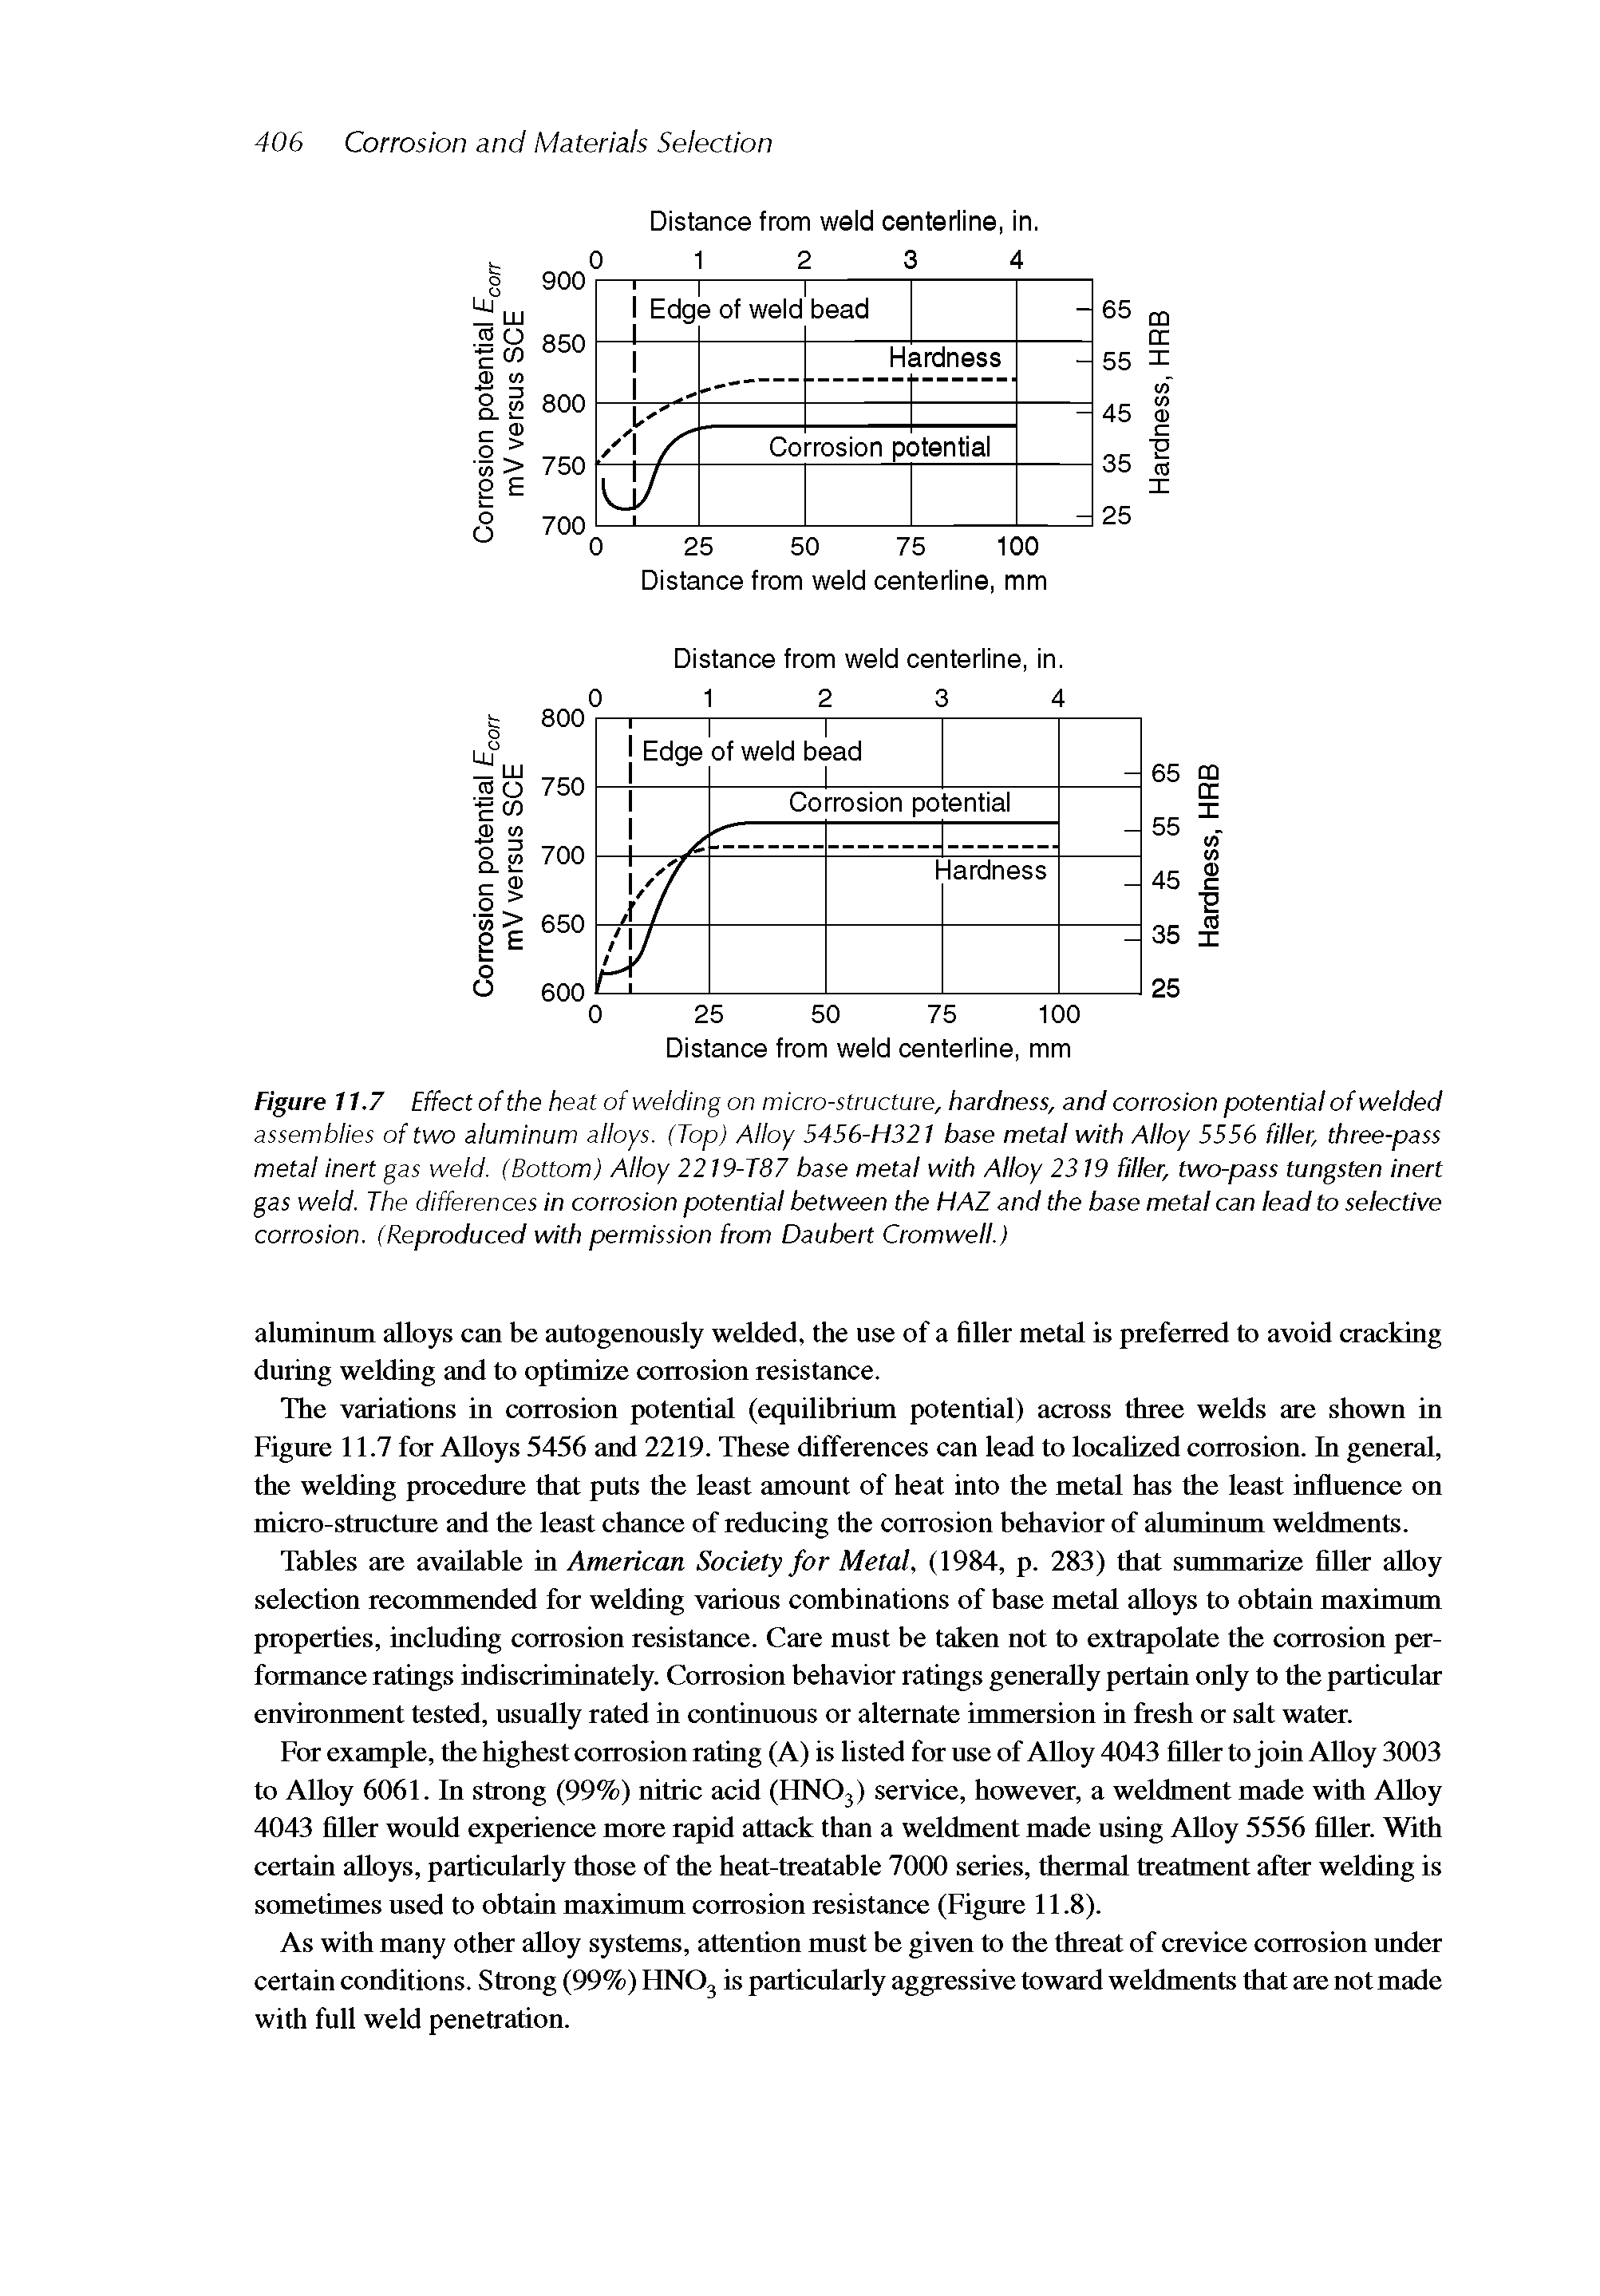 Tables are available in American Society for Metal, (1984, p. 283) that summarize filler alloy selection recommended for welding various combinations of base metal alloys to obtain maximum properties, including corrosion resistance. Care must be taken not to extrapolate the corrosion performance ratings indiscriminately. Corrosion behavior ratings generally pertain only to the particular environment tested, usually rated in continuous or alternate immersion in fresh or salt water.